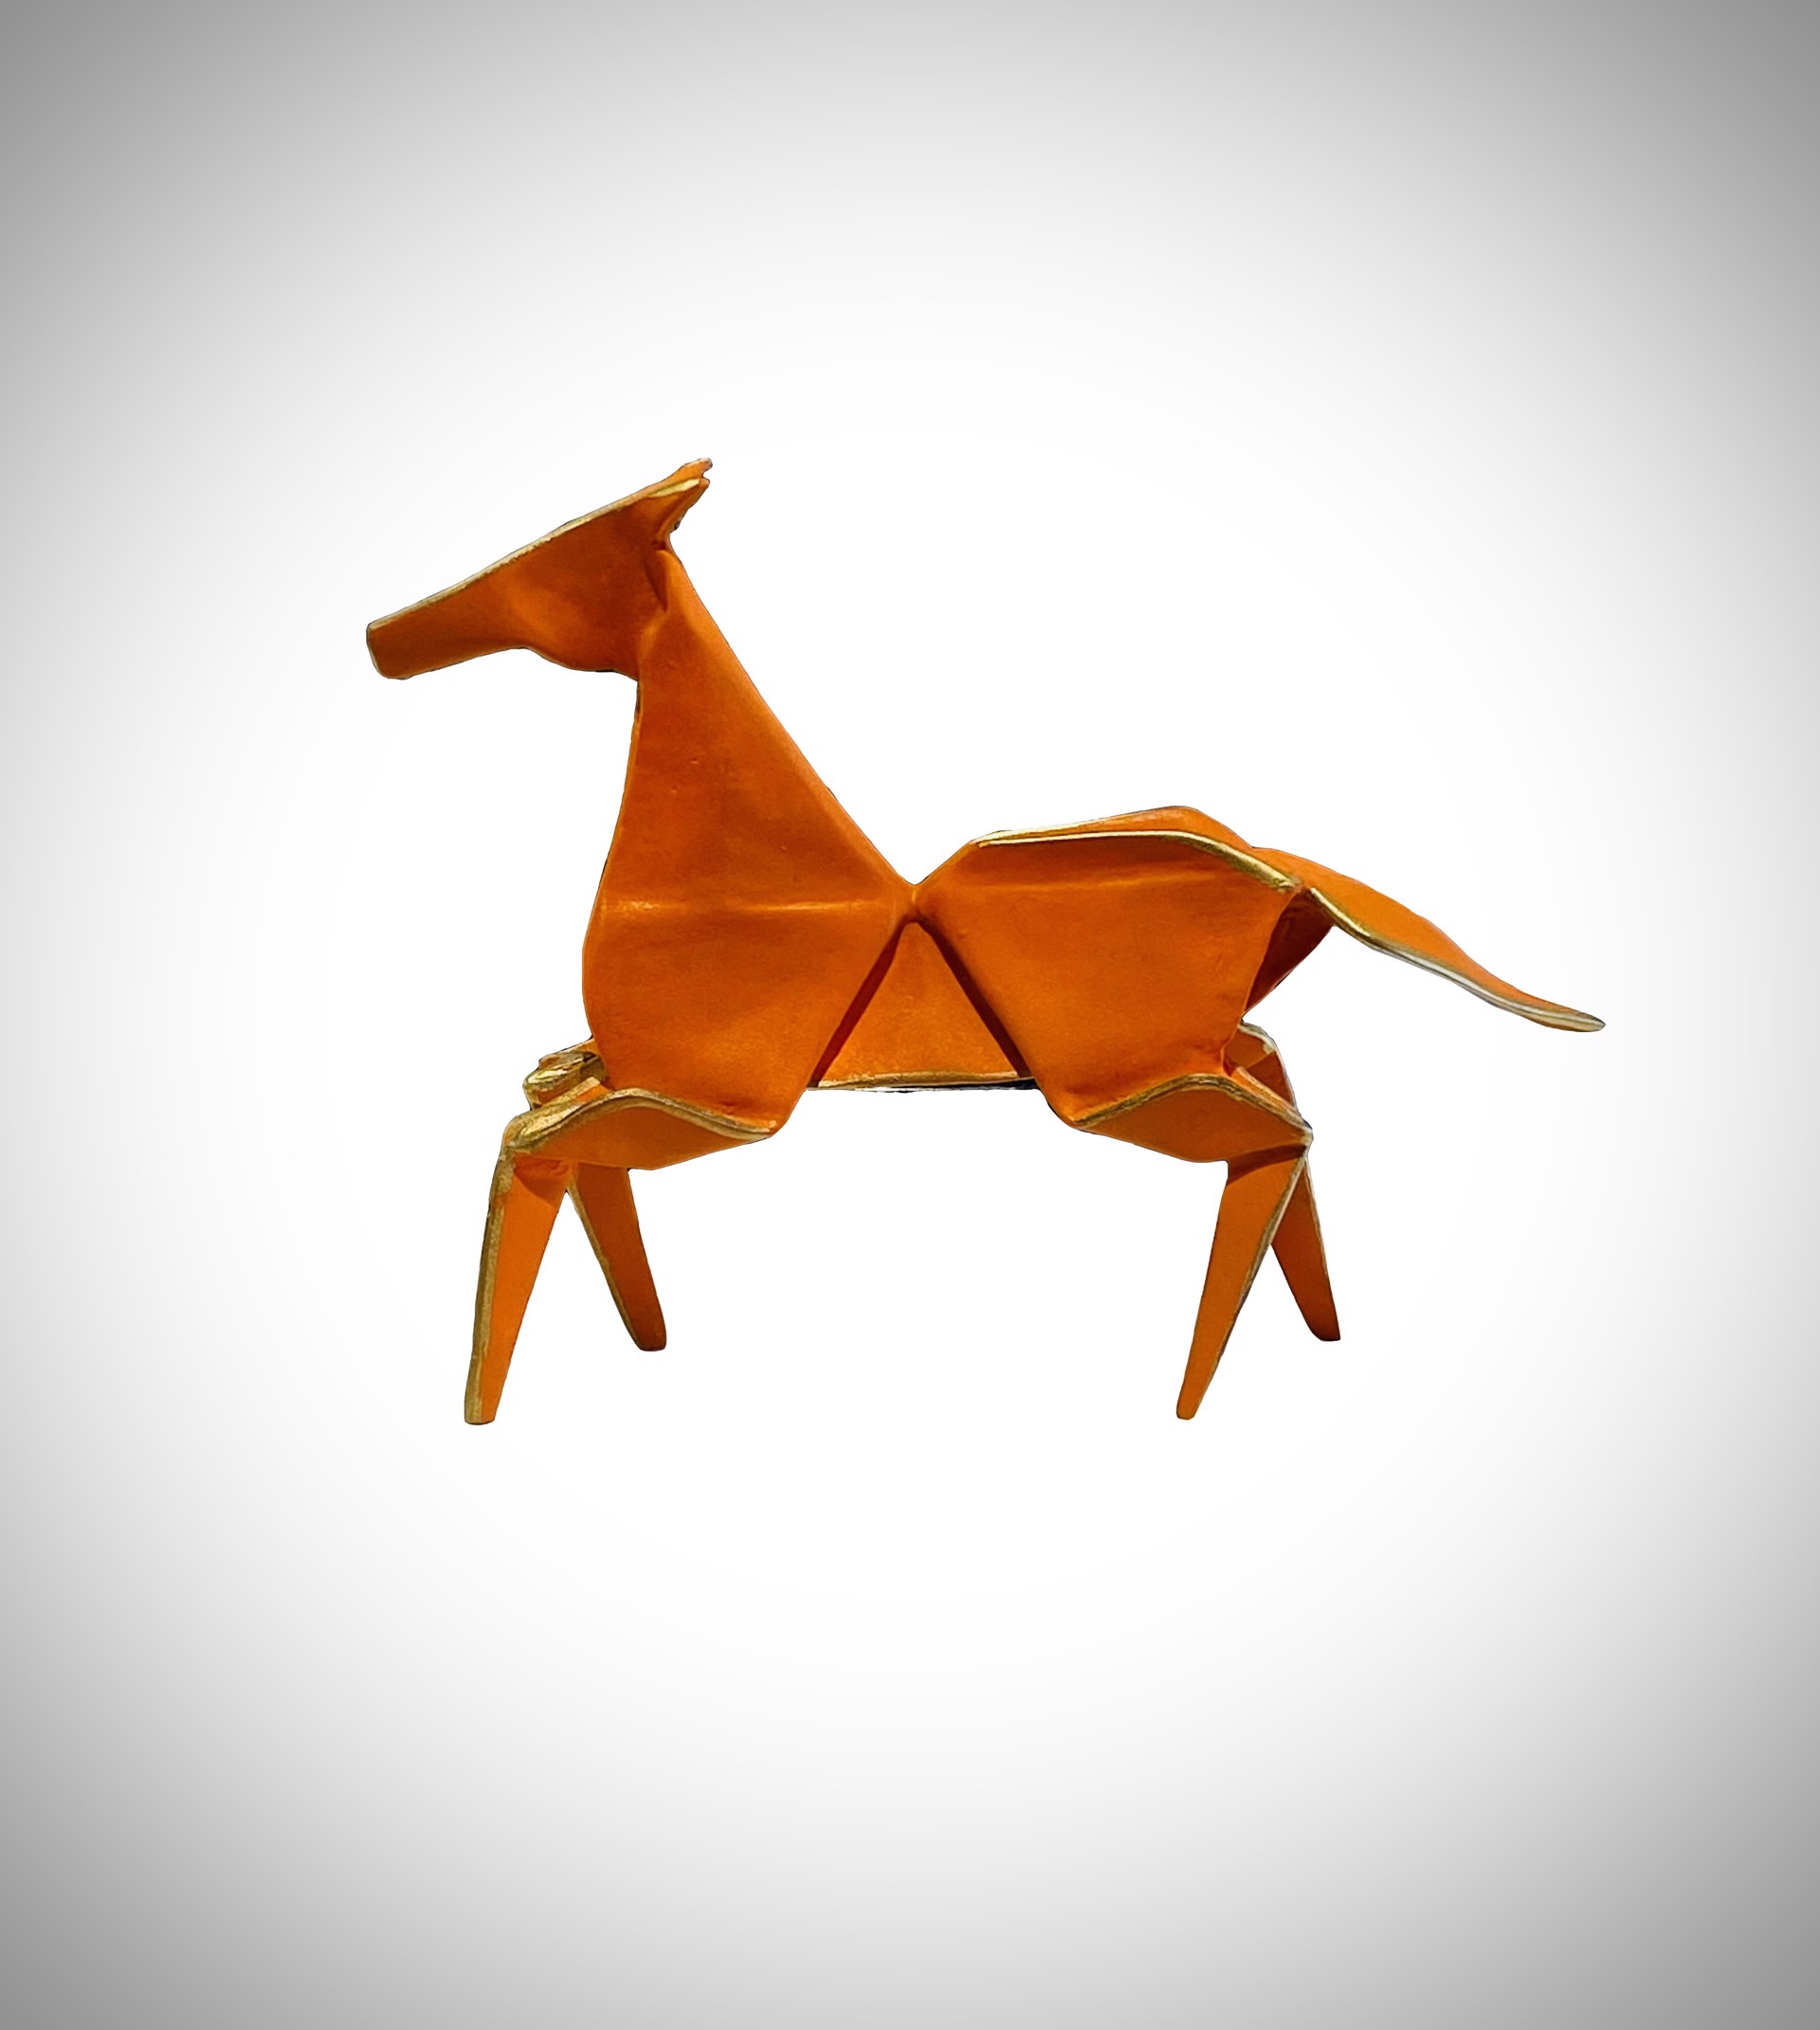 Orange Mini Pony (in collaboration with Te Jui Fe) by KEVIN BOX